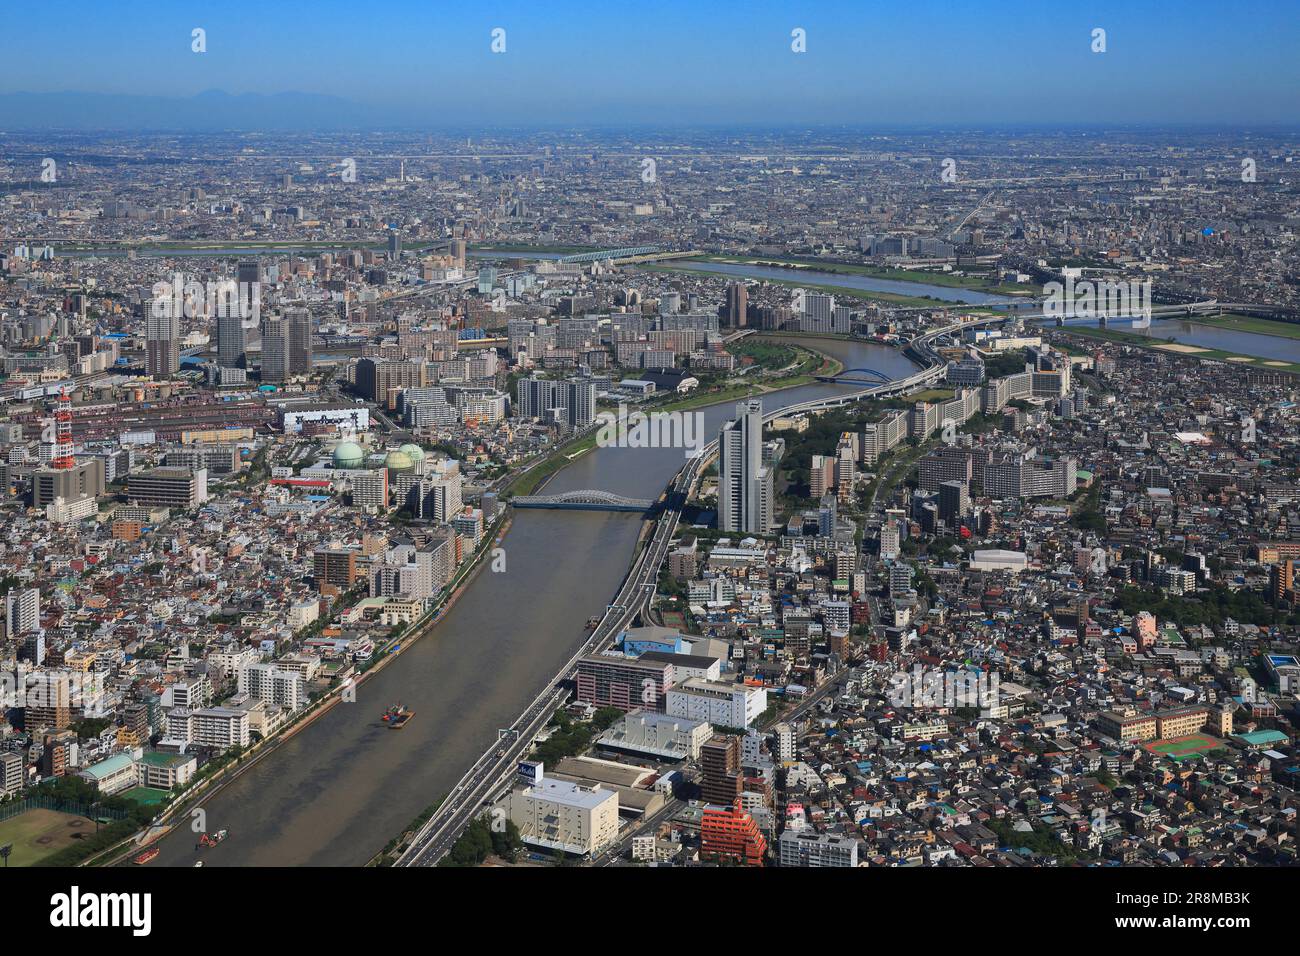 The Sumida River and the Arakawa River viewed from the Tokyo Skytree Stock Photo